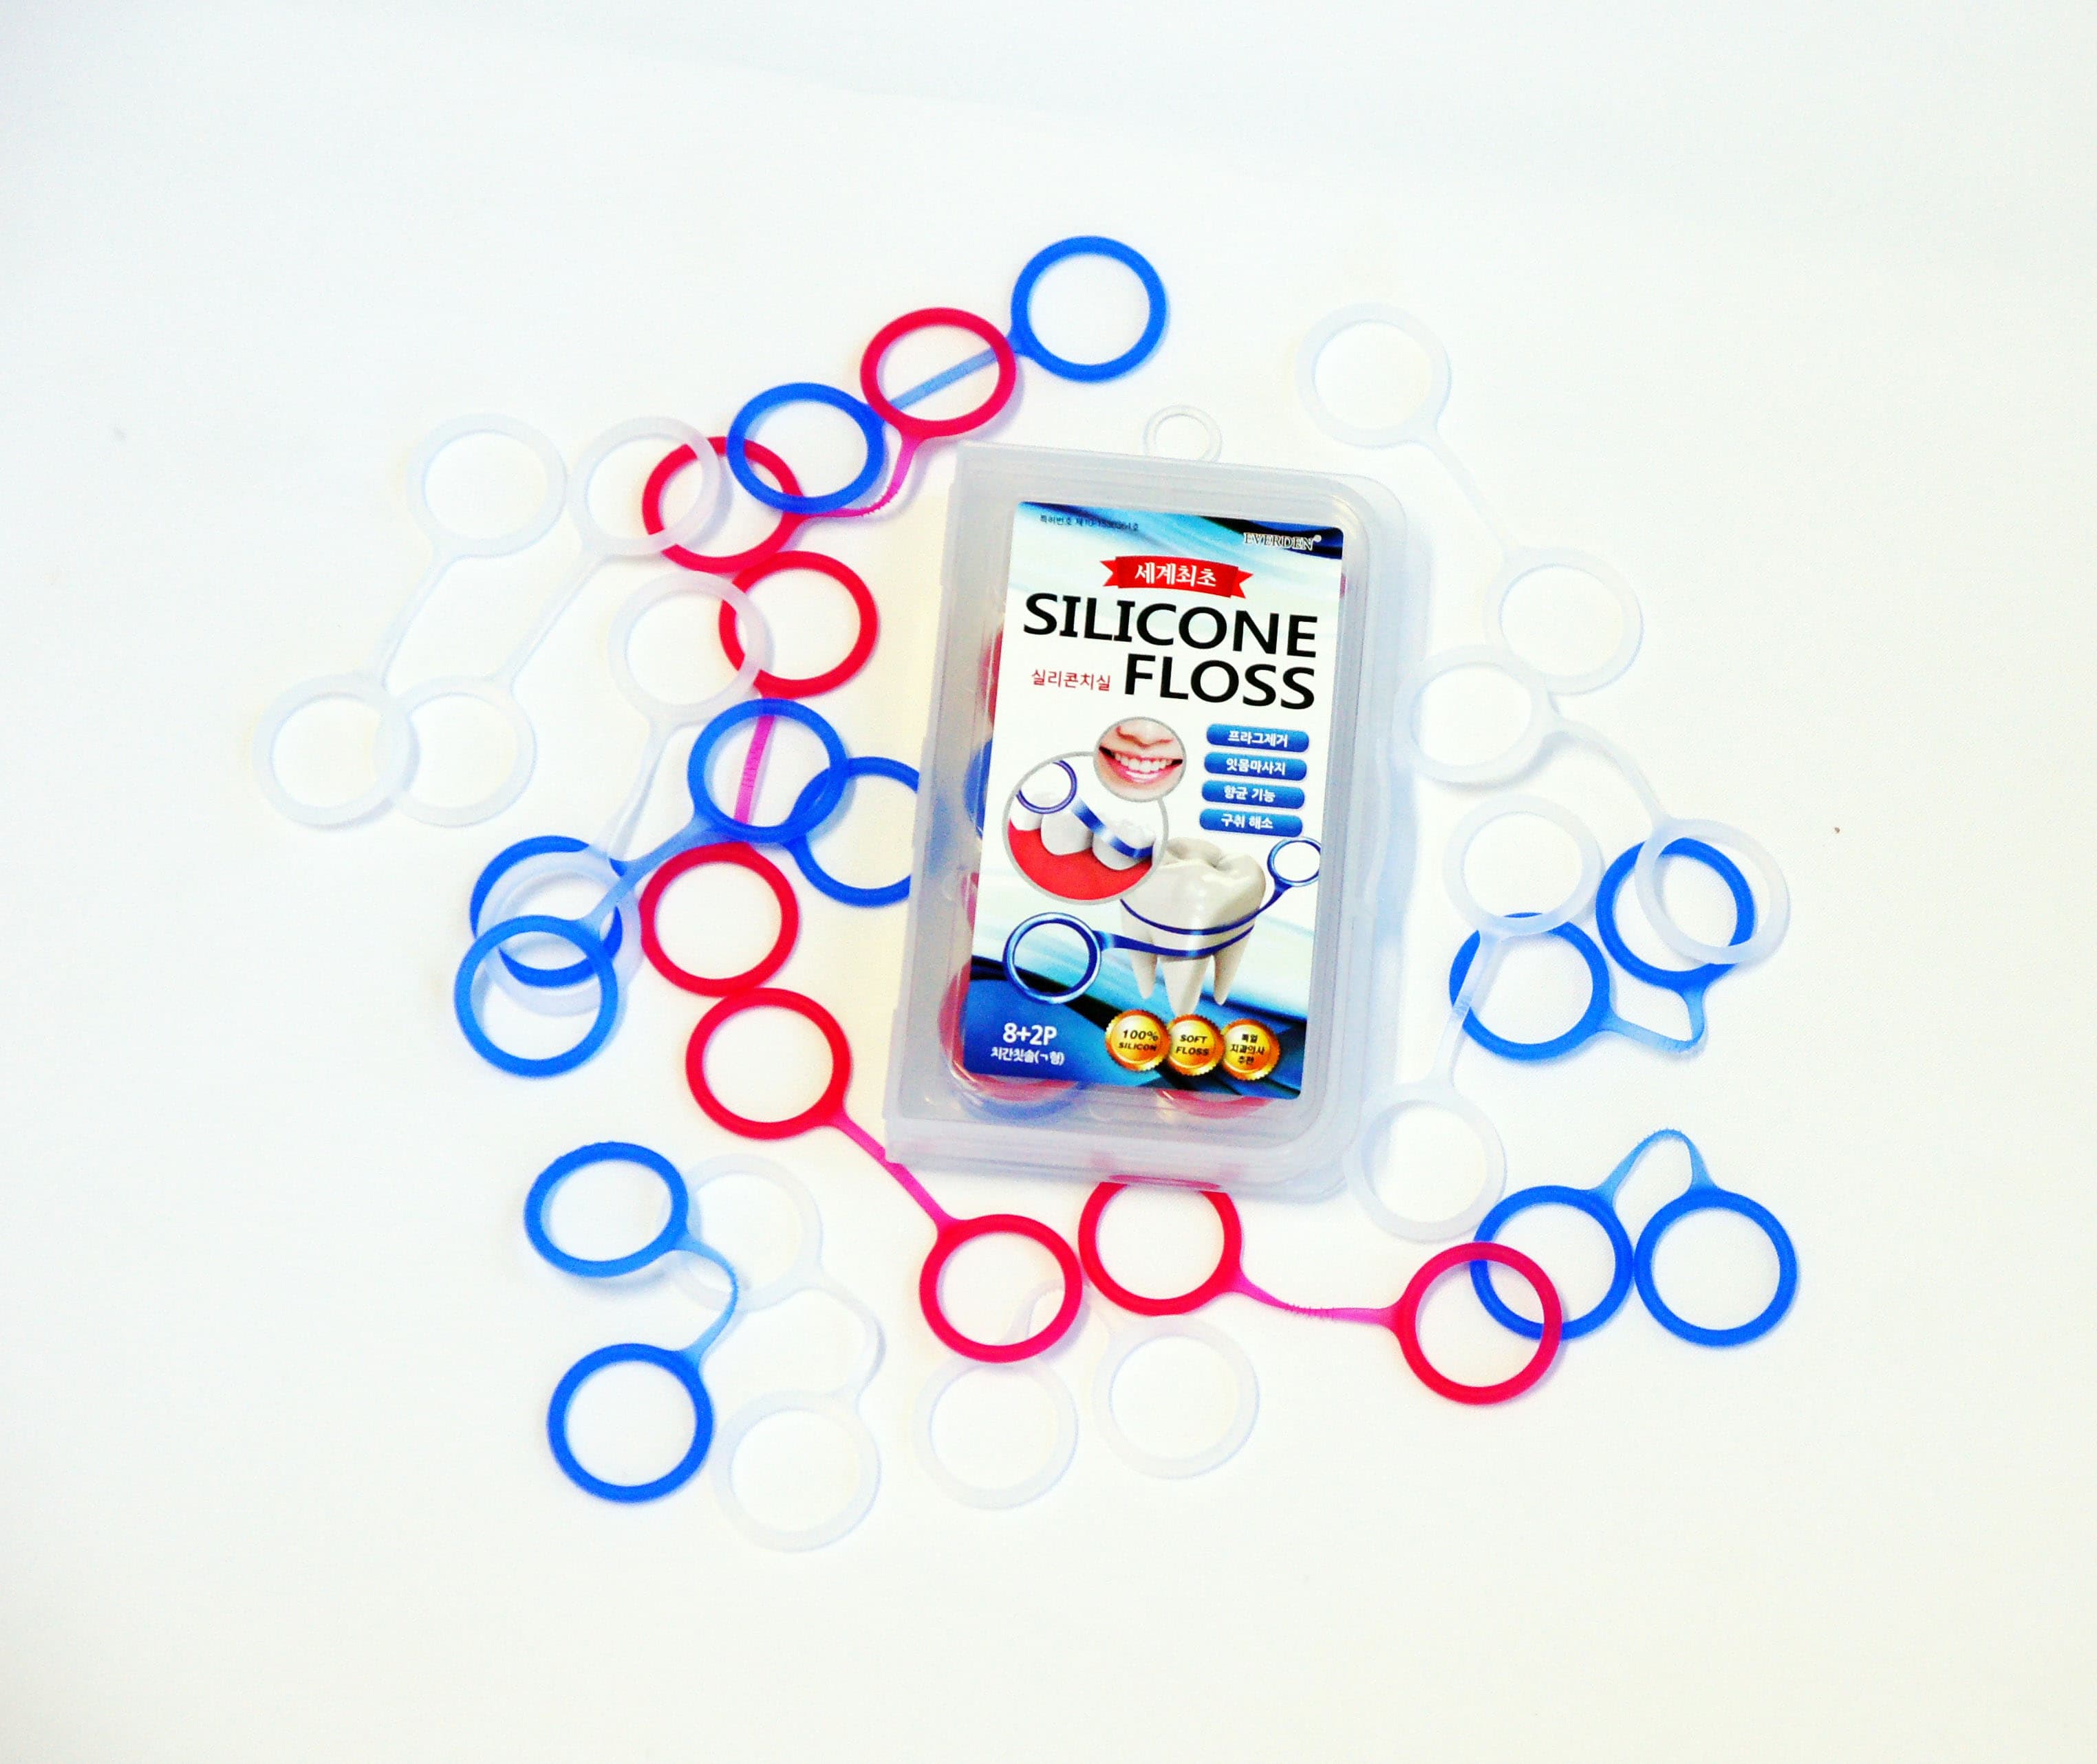 Silicone dental floss